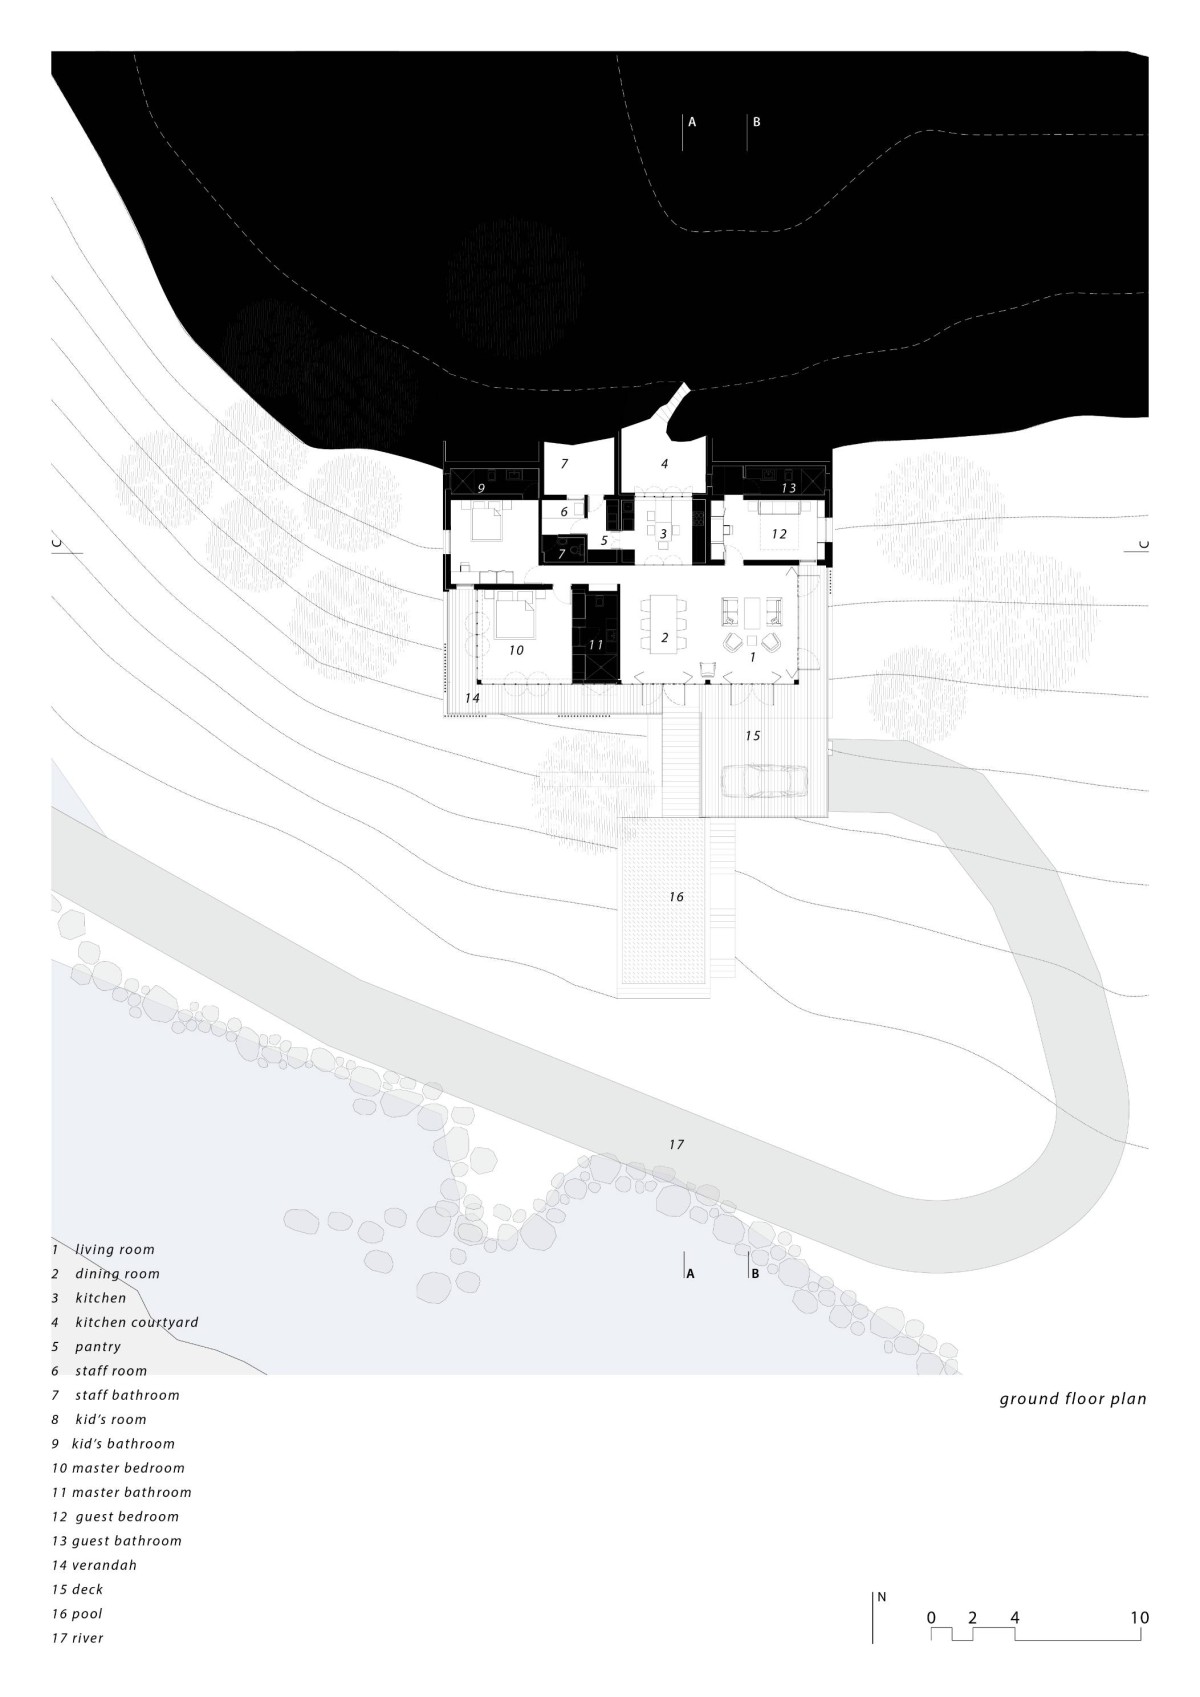 Ground floor plan of The Riparian House by Architecture BRIO